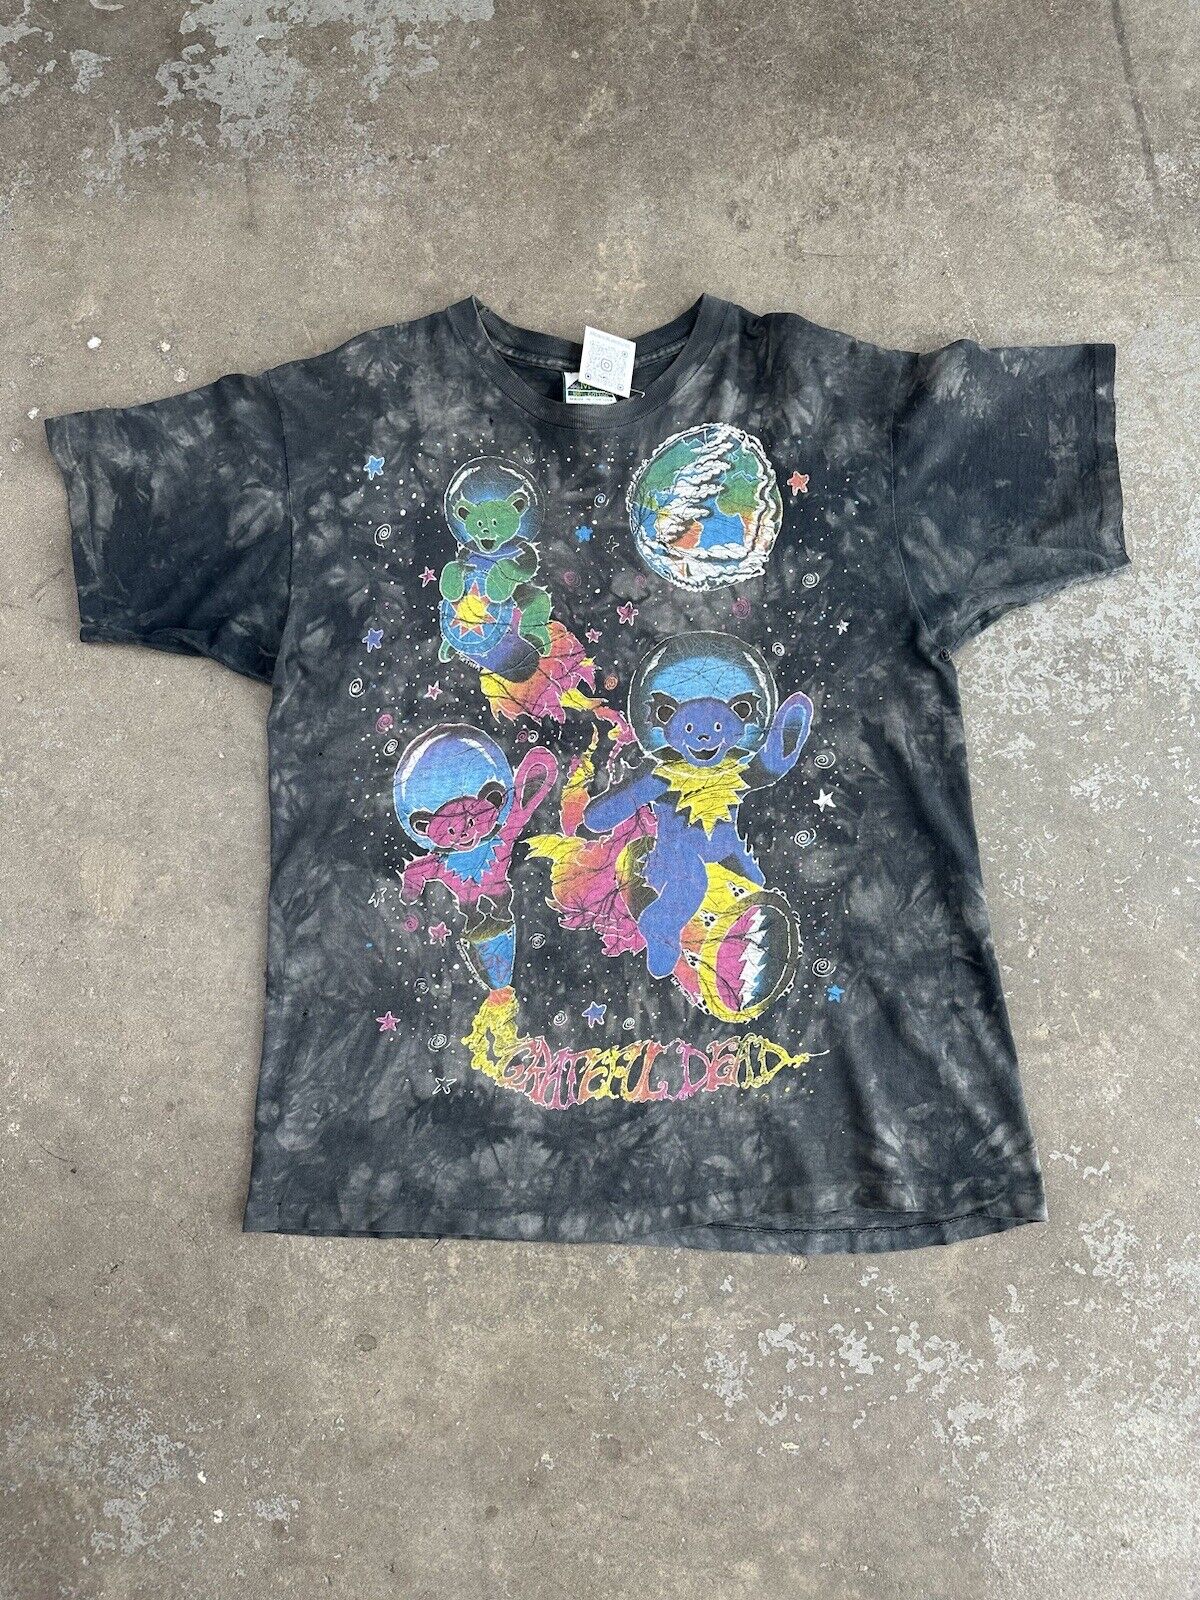 Vintage 1994 Grateful Dead The Mountain Bears in Space Band Tshirt Rare Size XL